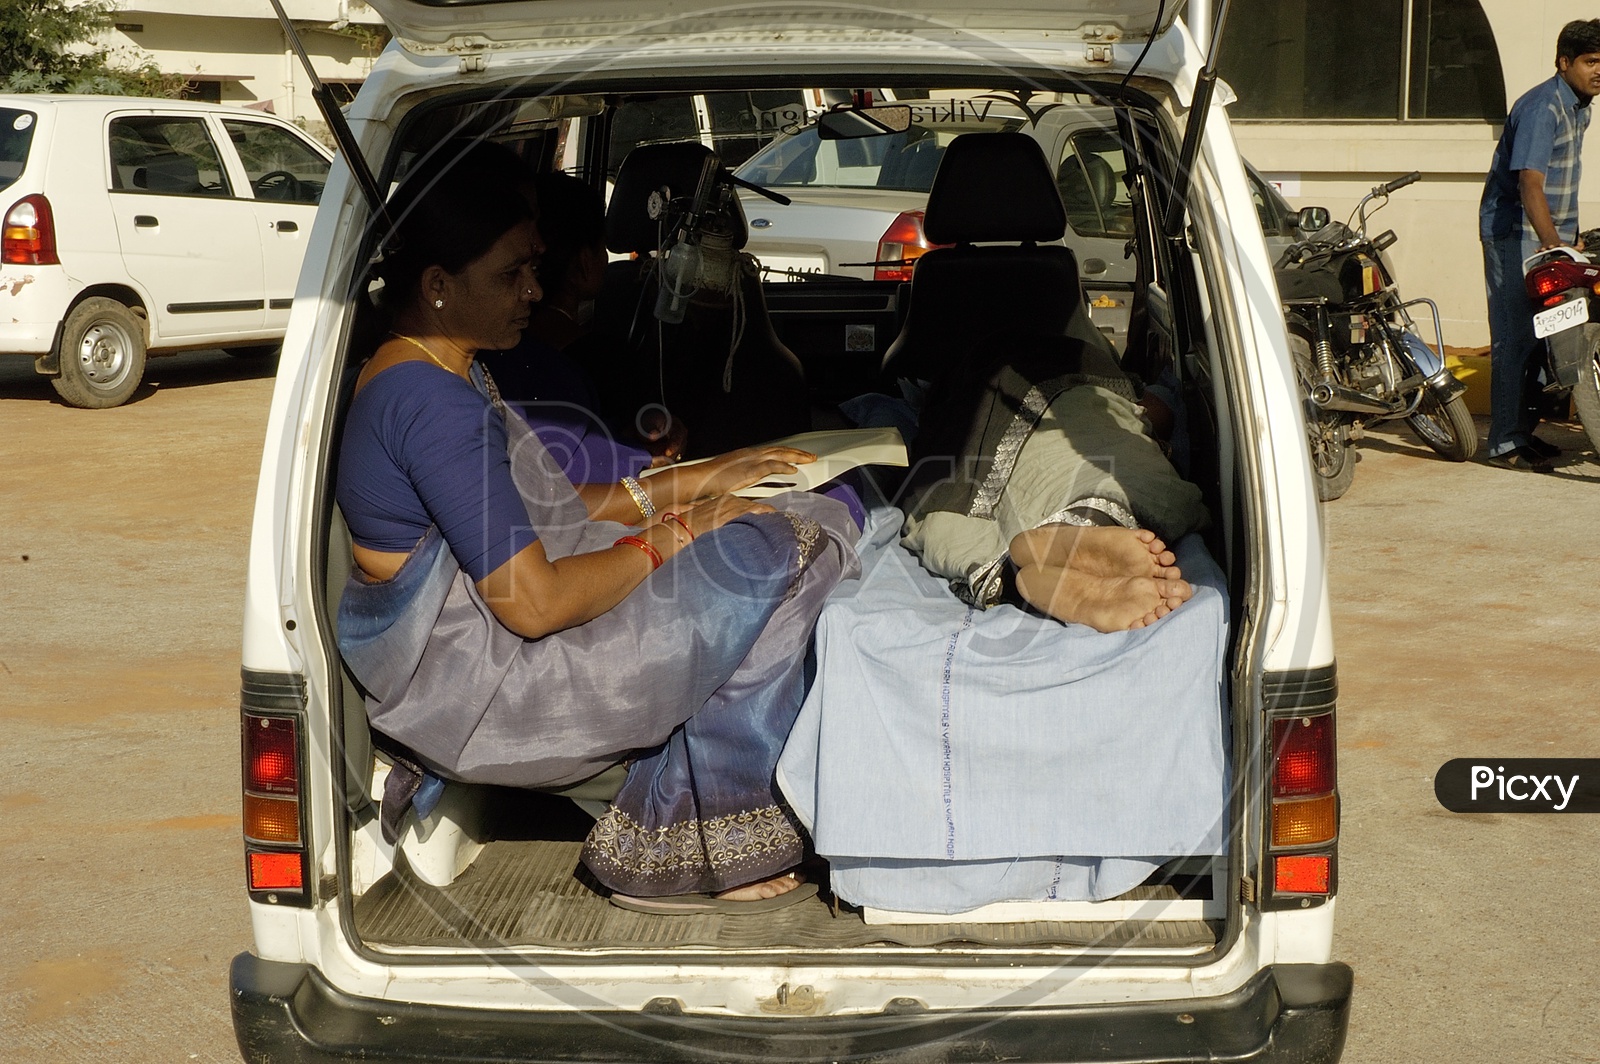 Women taking the patient to hospital in an ambulance